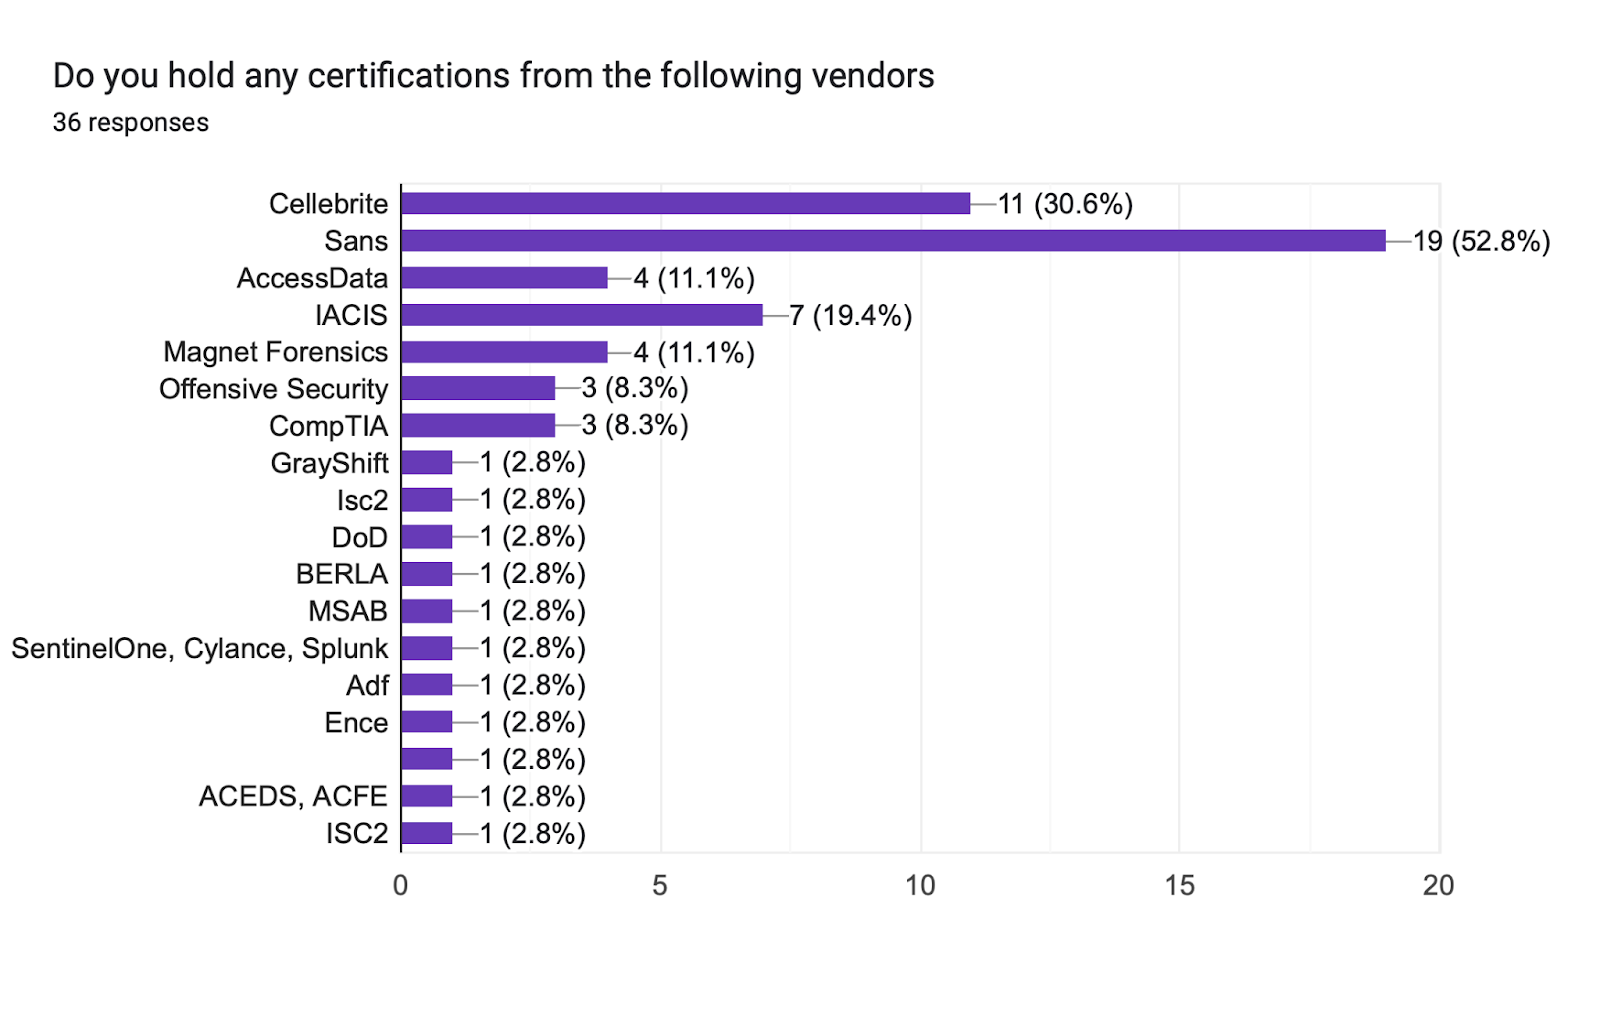 Forms response chart. Question title: Do you hold any certifications from the following vendors. Number of responses: 36 responses.